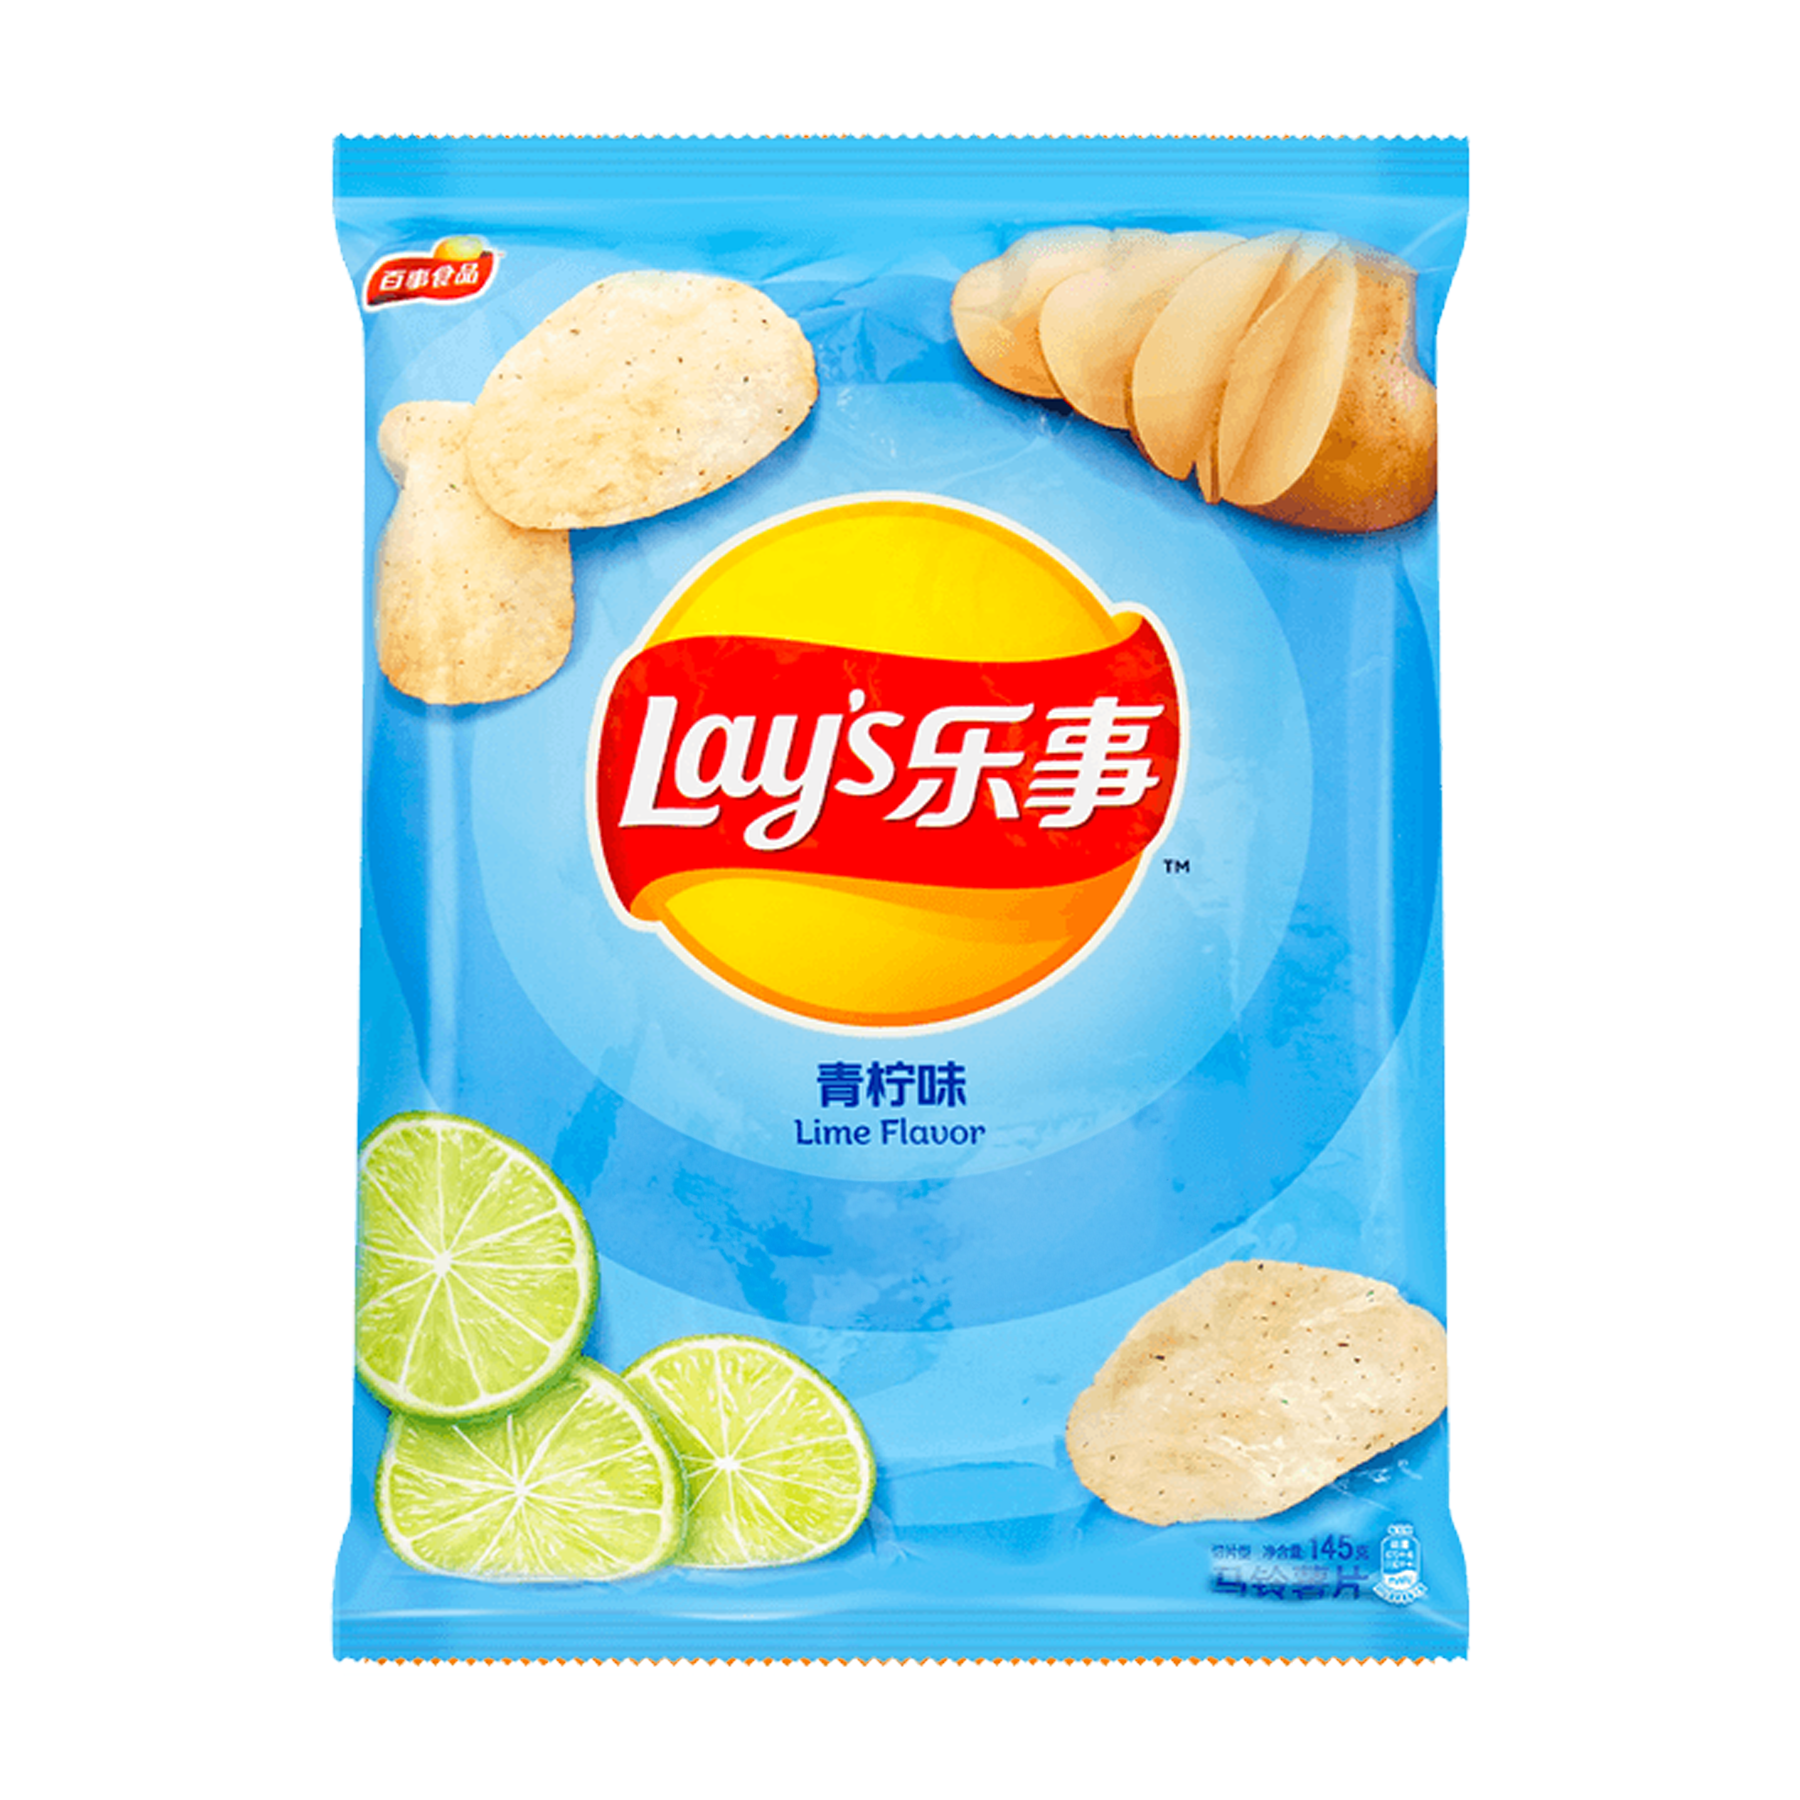 Lays Lime Flavored Chips